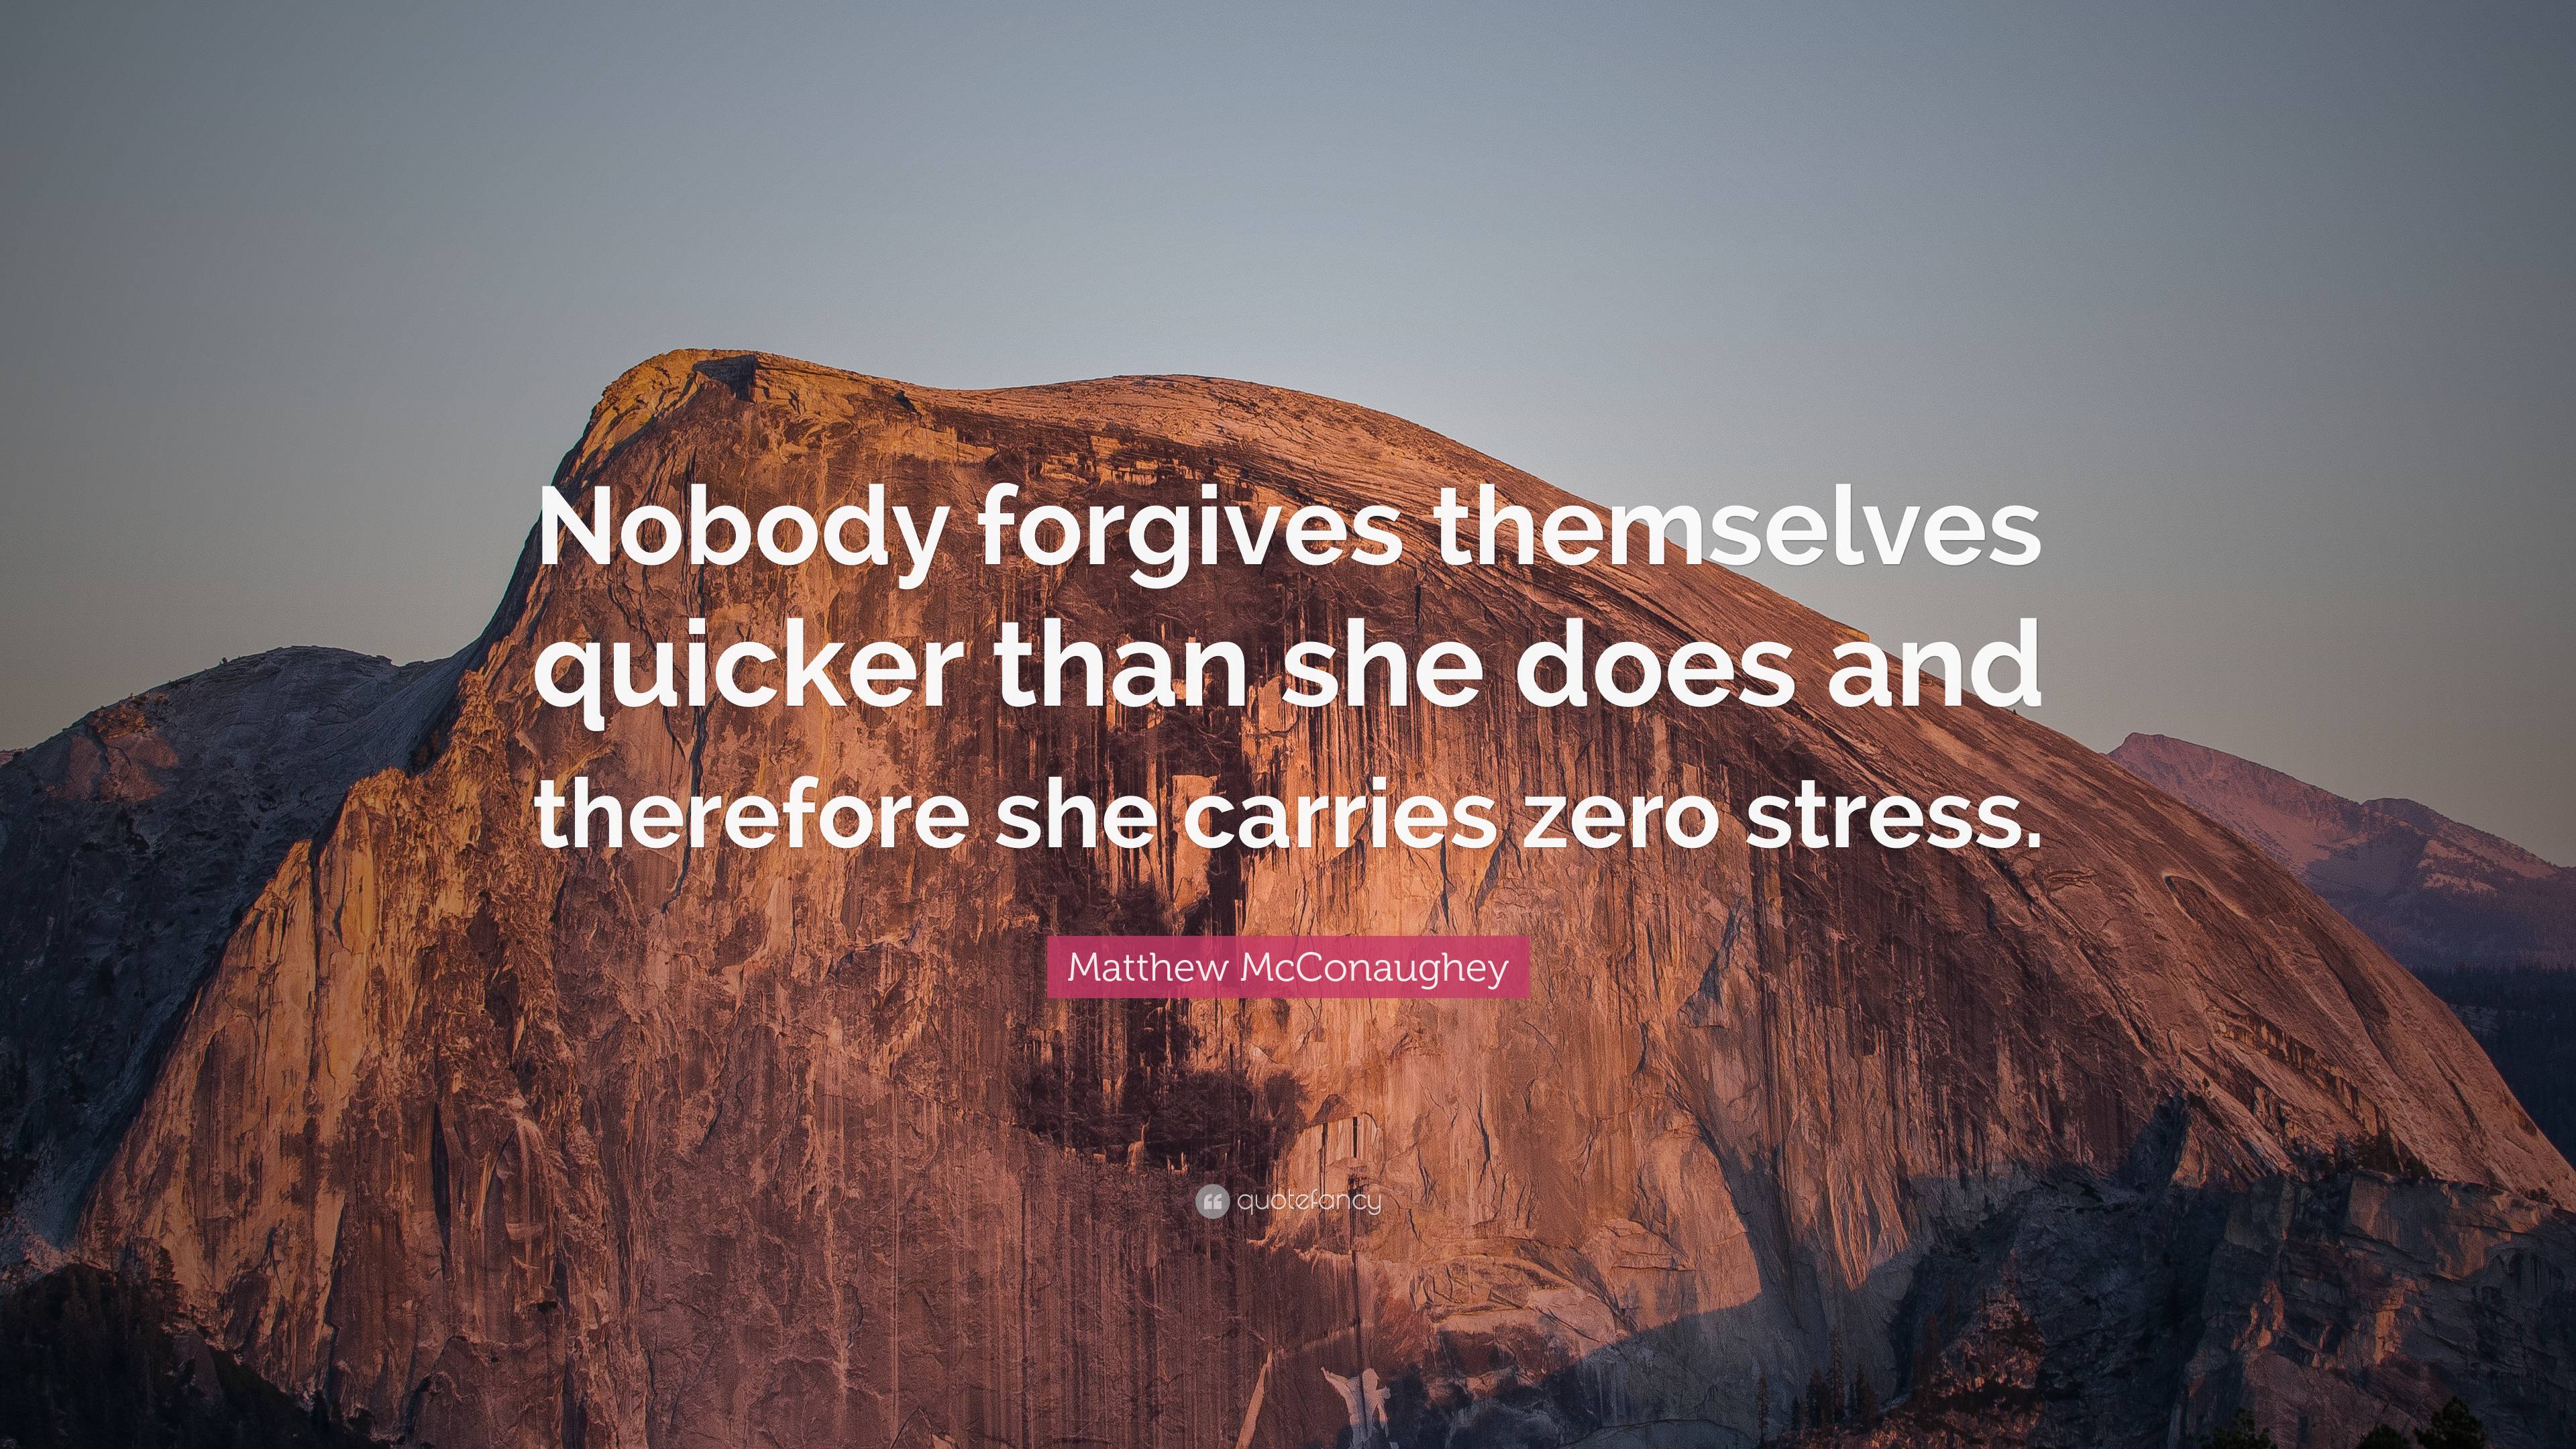 Matthew McConaughey Quote: “Nobody forgives themselves quicker than she ...